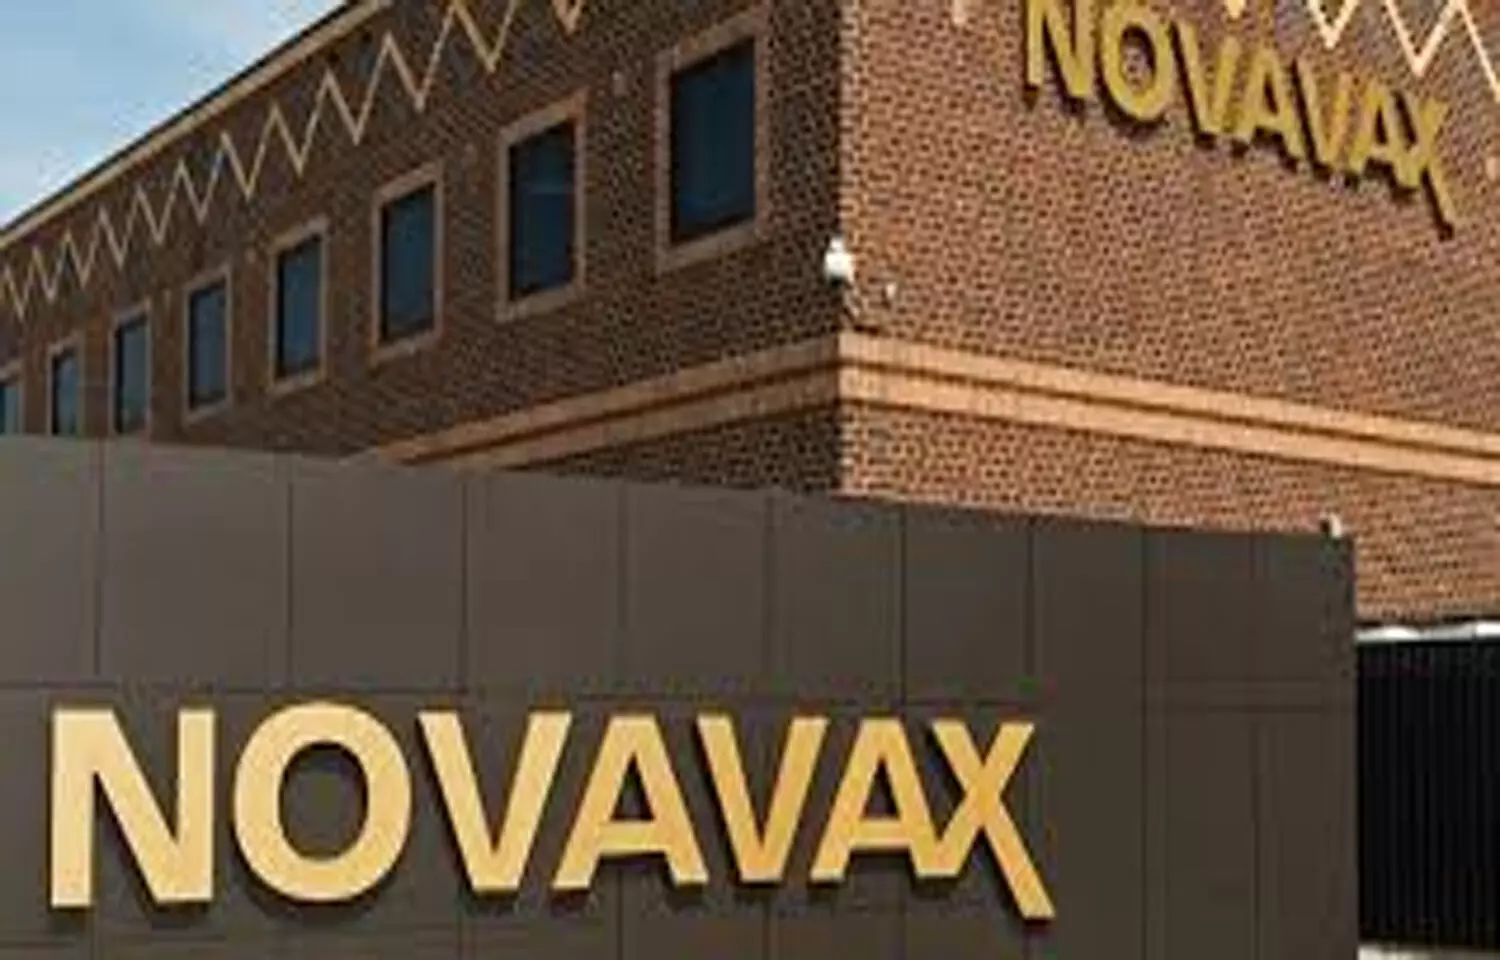 First: Novavax Covid-19 vaccine gets emergency use authorization in Indonesia